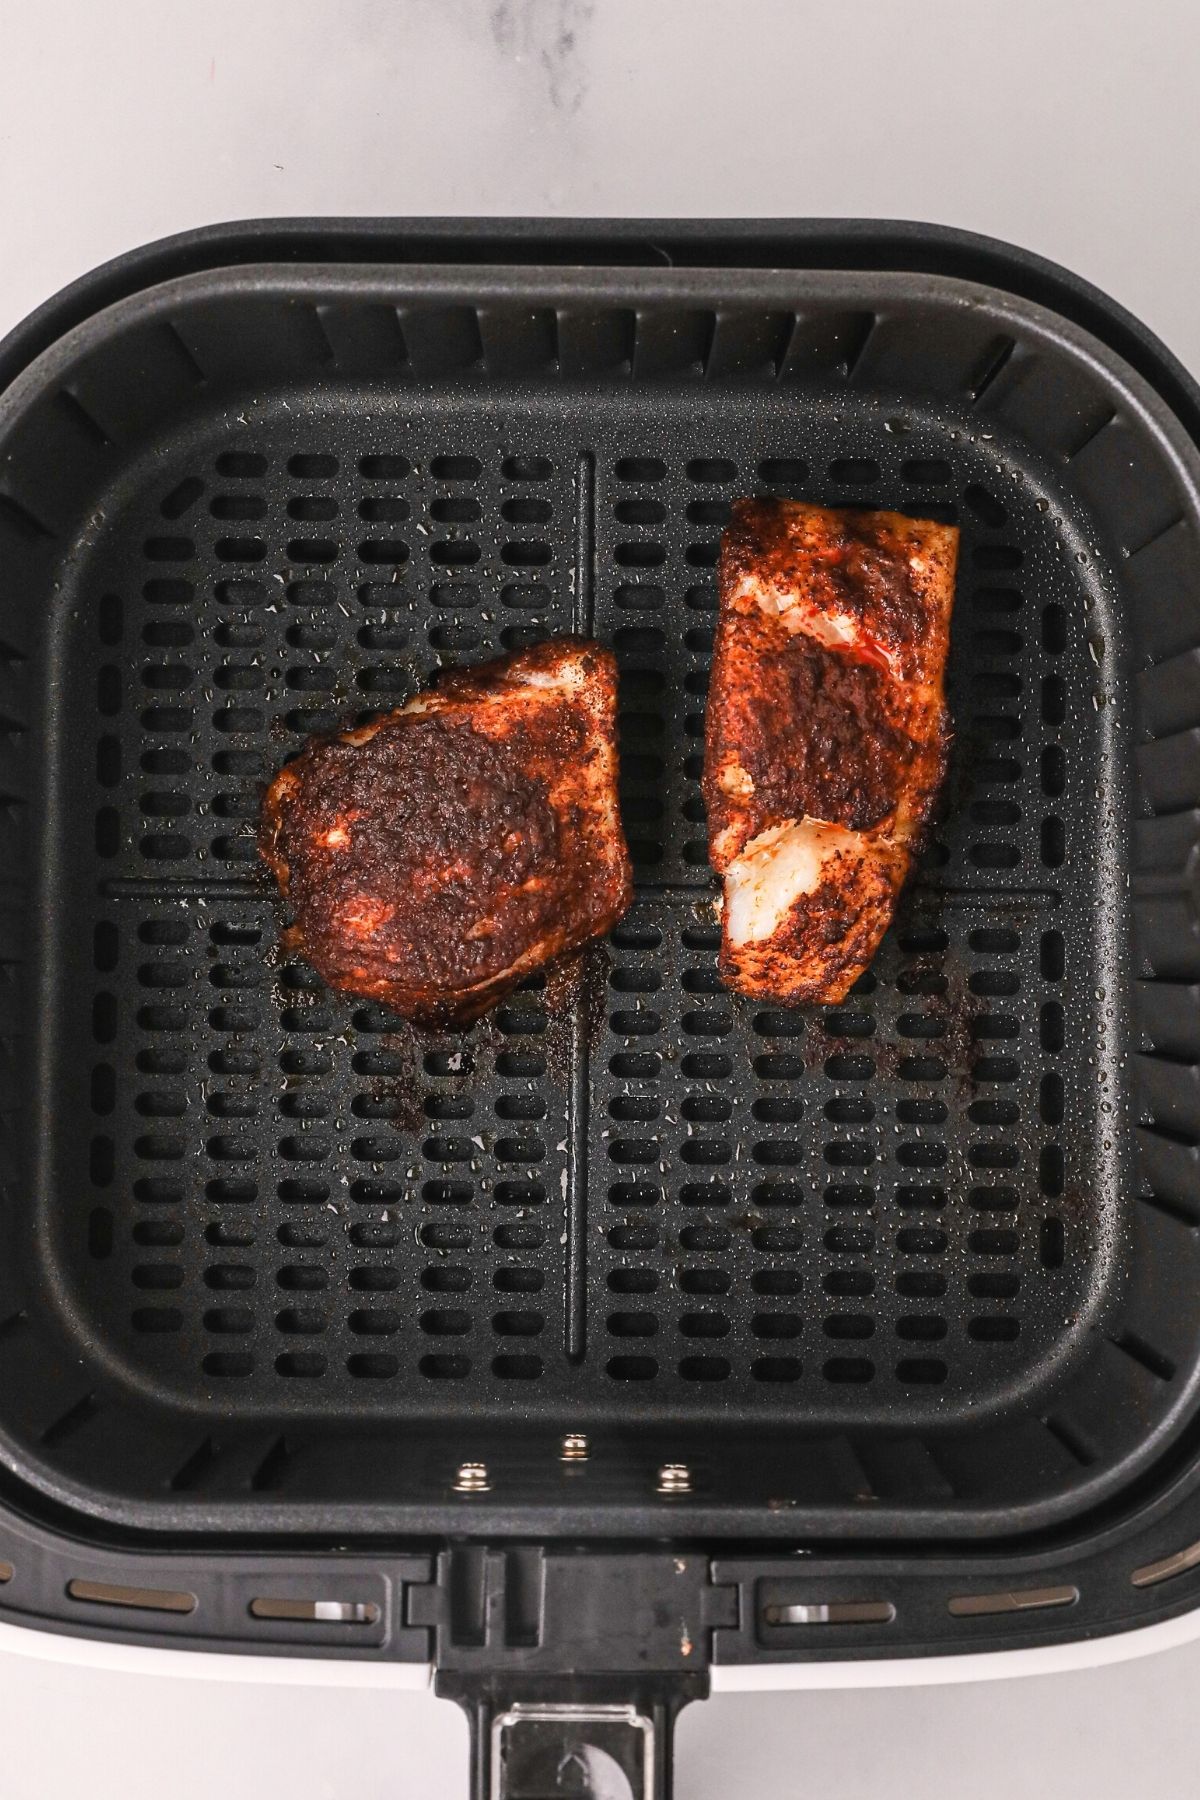 cod filets in the air fryer basket after being cooked in the air fryer